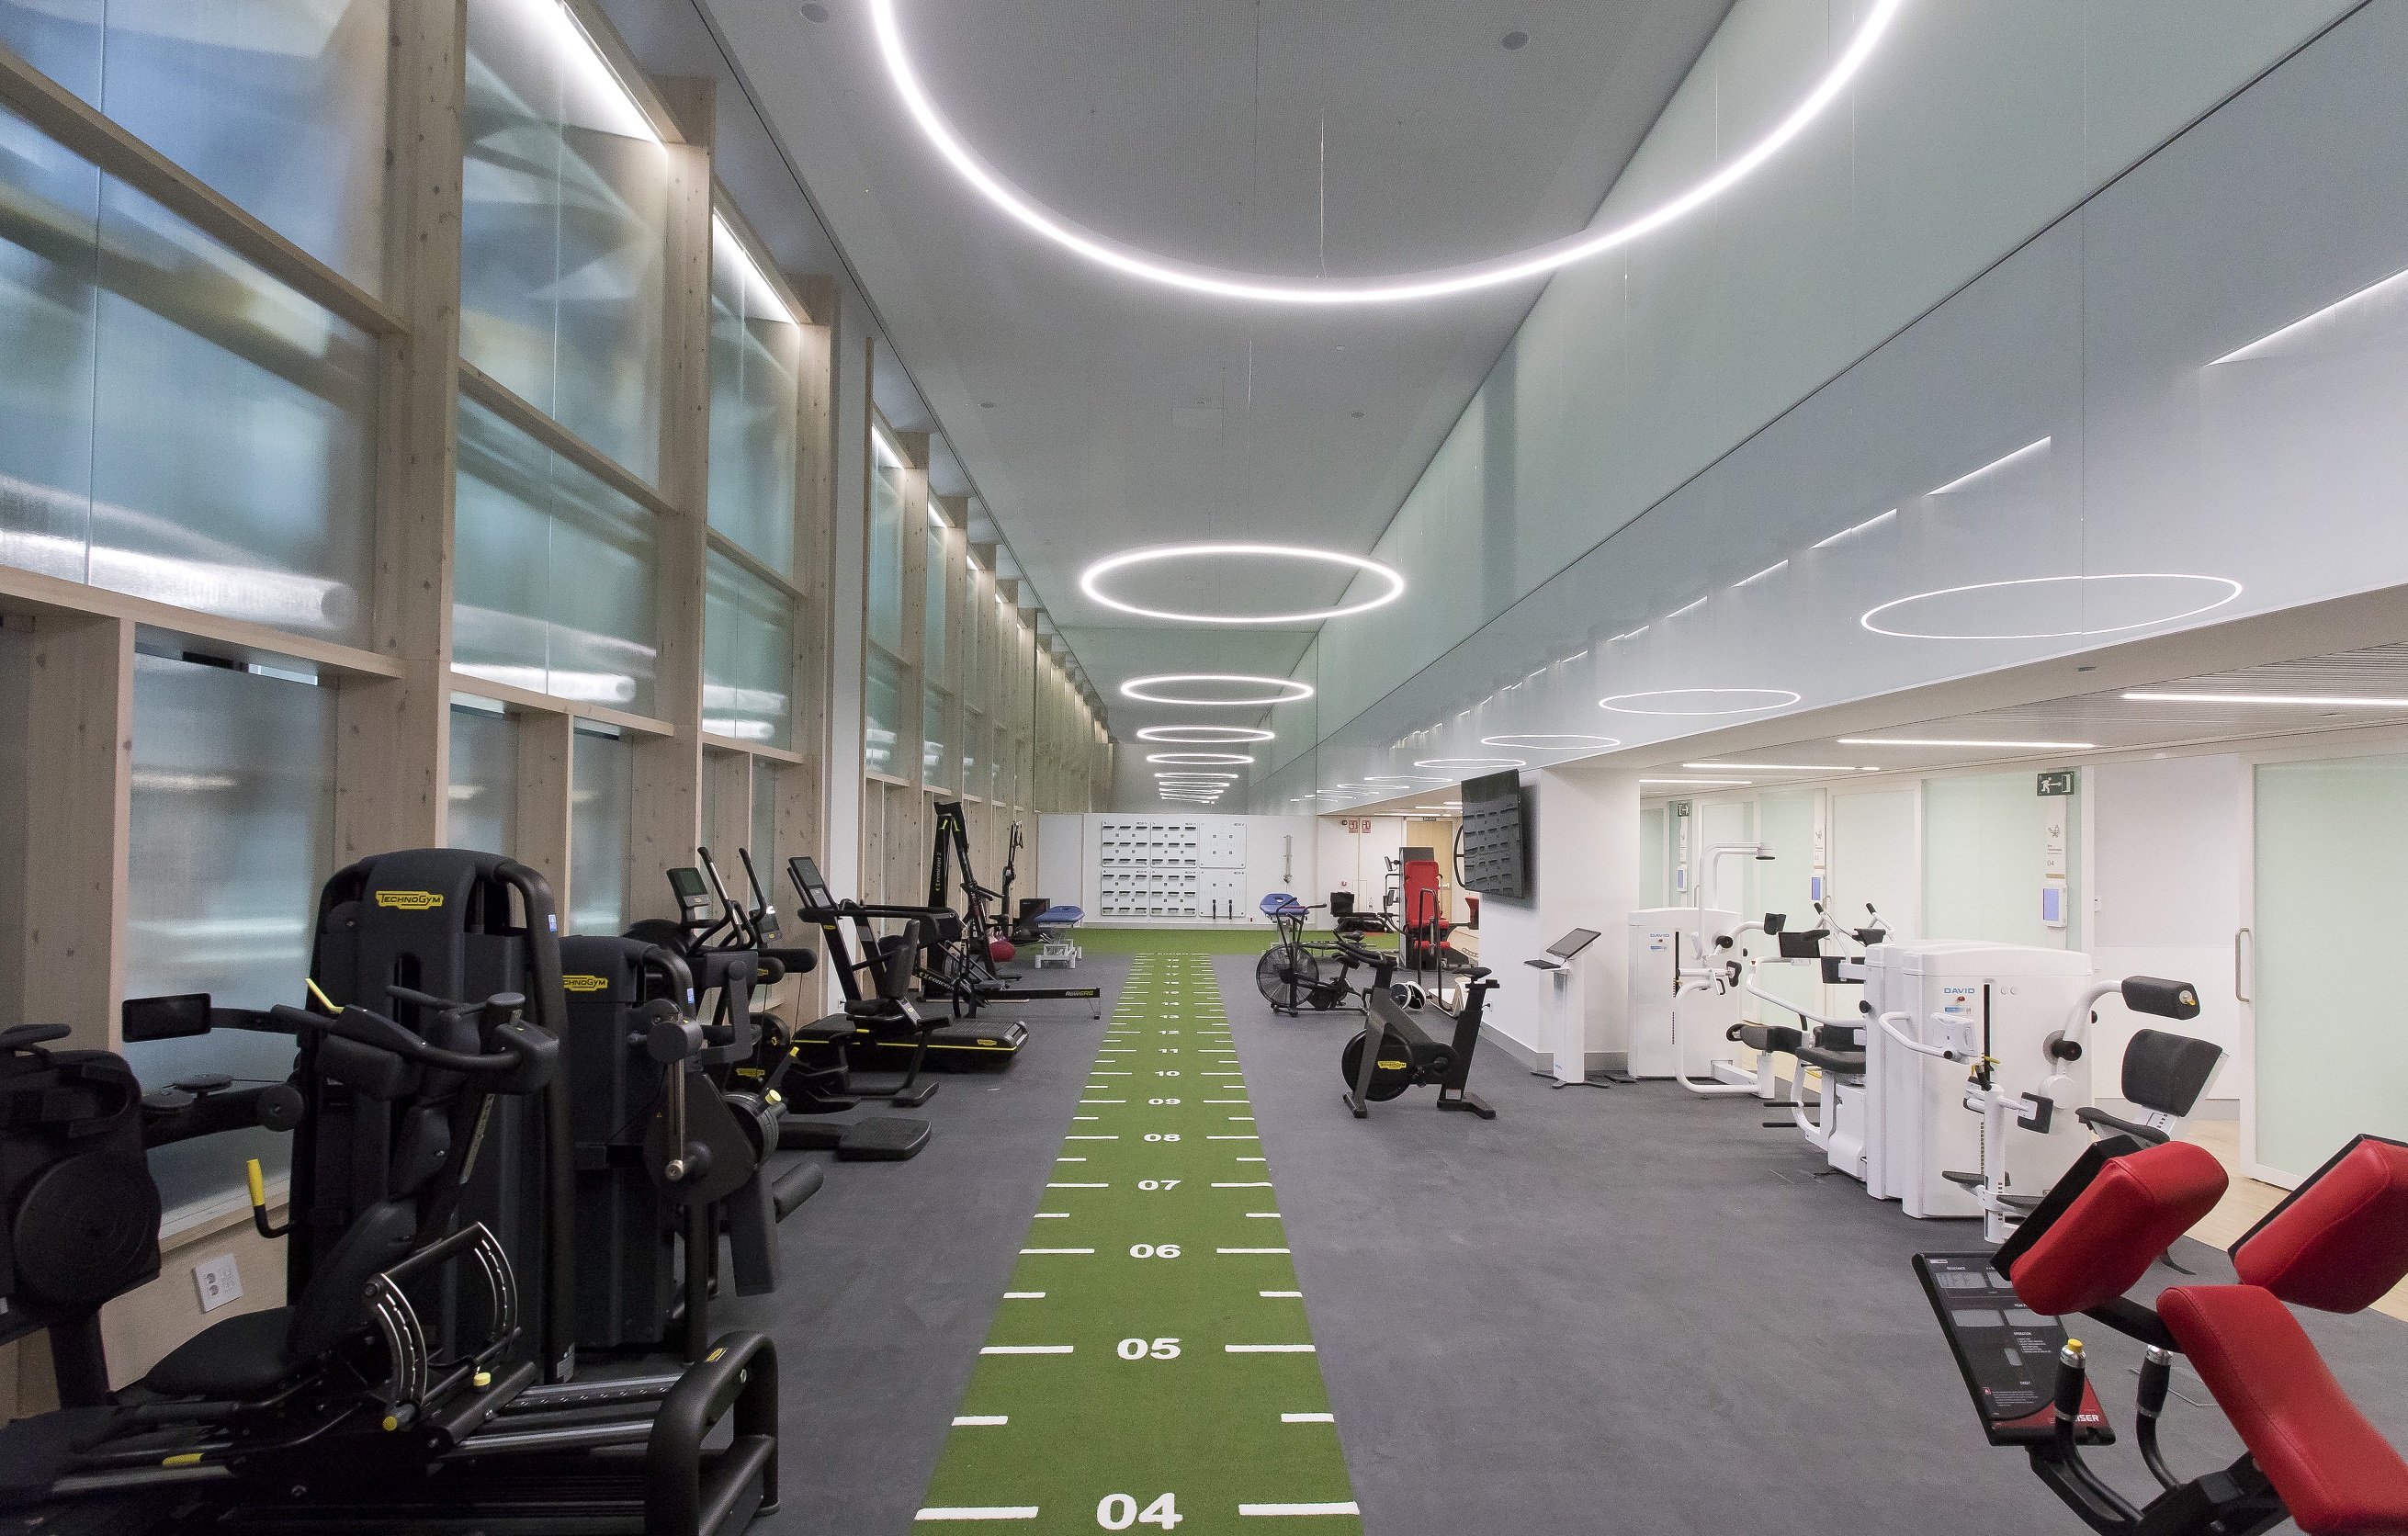 The equipment of the Sport Center has the most cutting-edge technological equipment.